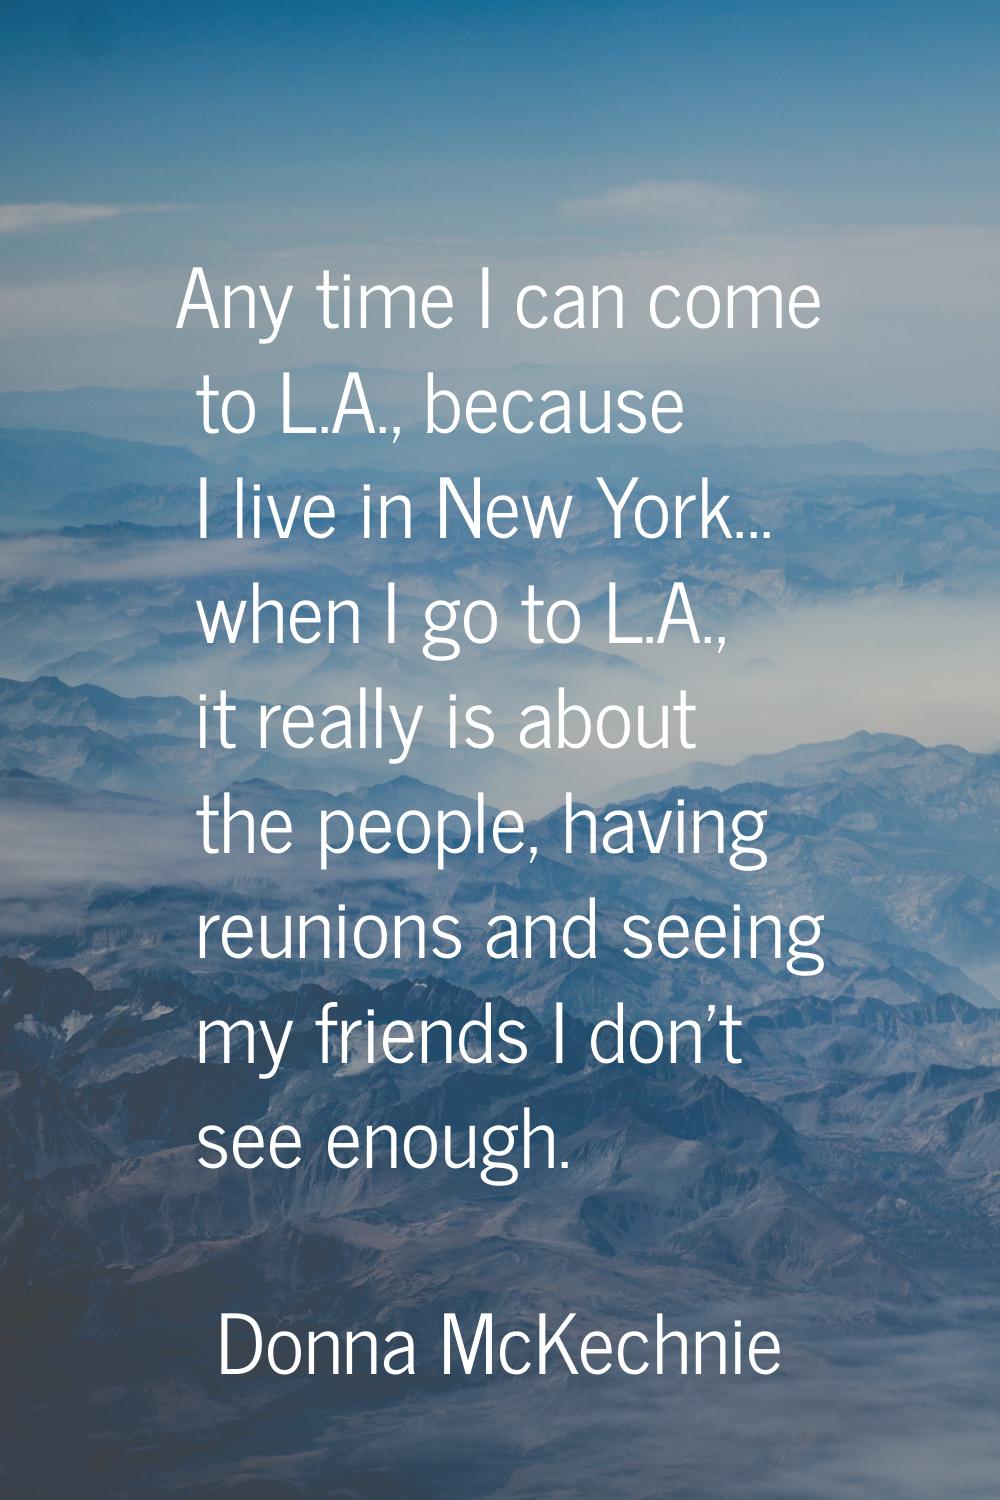 Any time I can come to L.A., because I live in New York... when I go to L.A., it really is about th